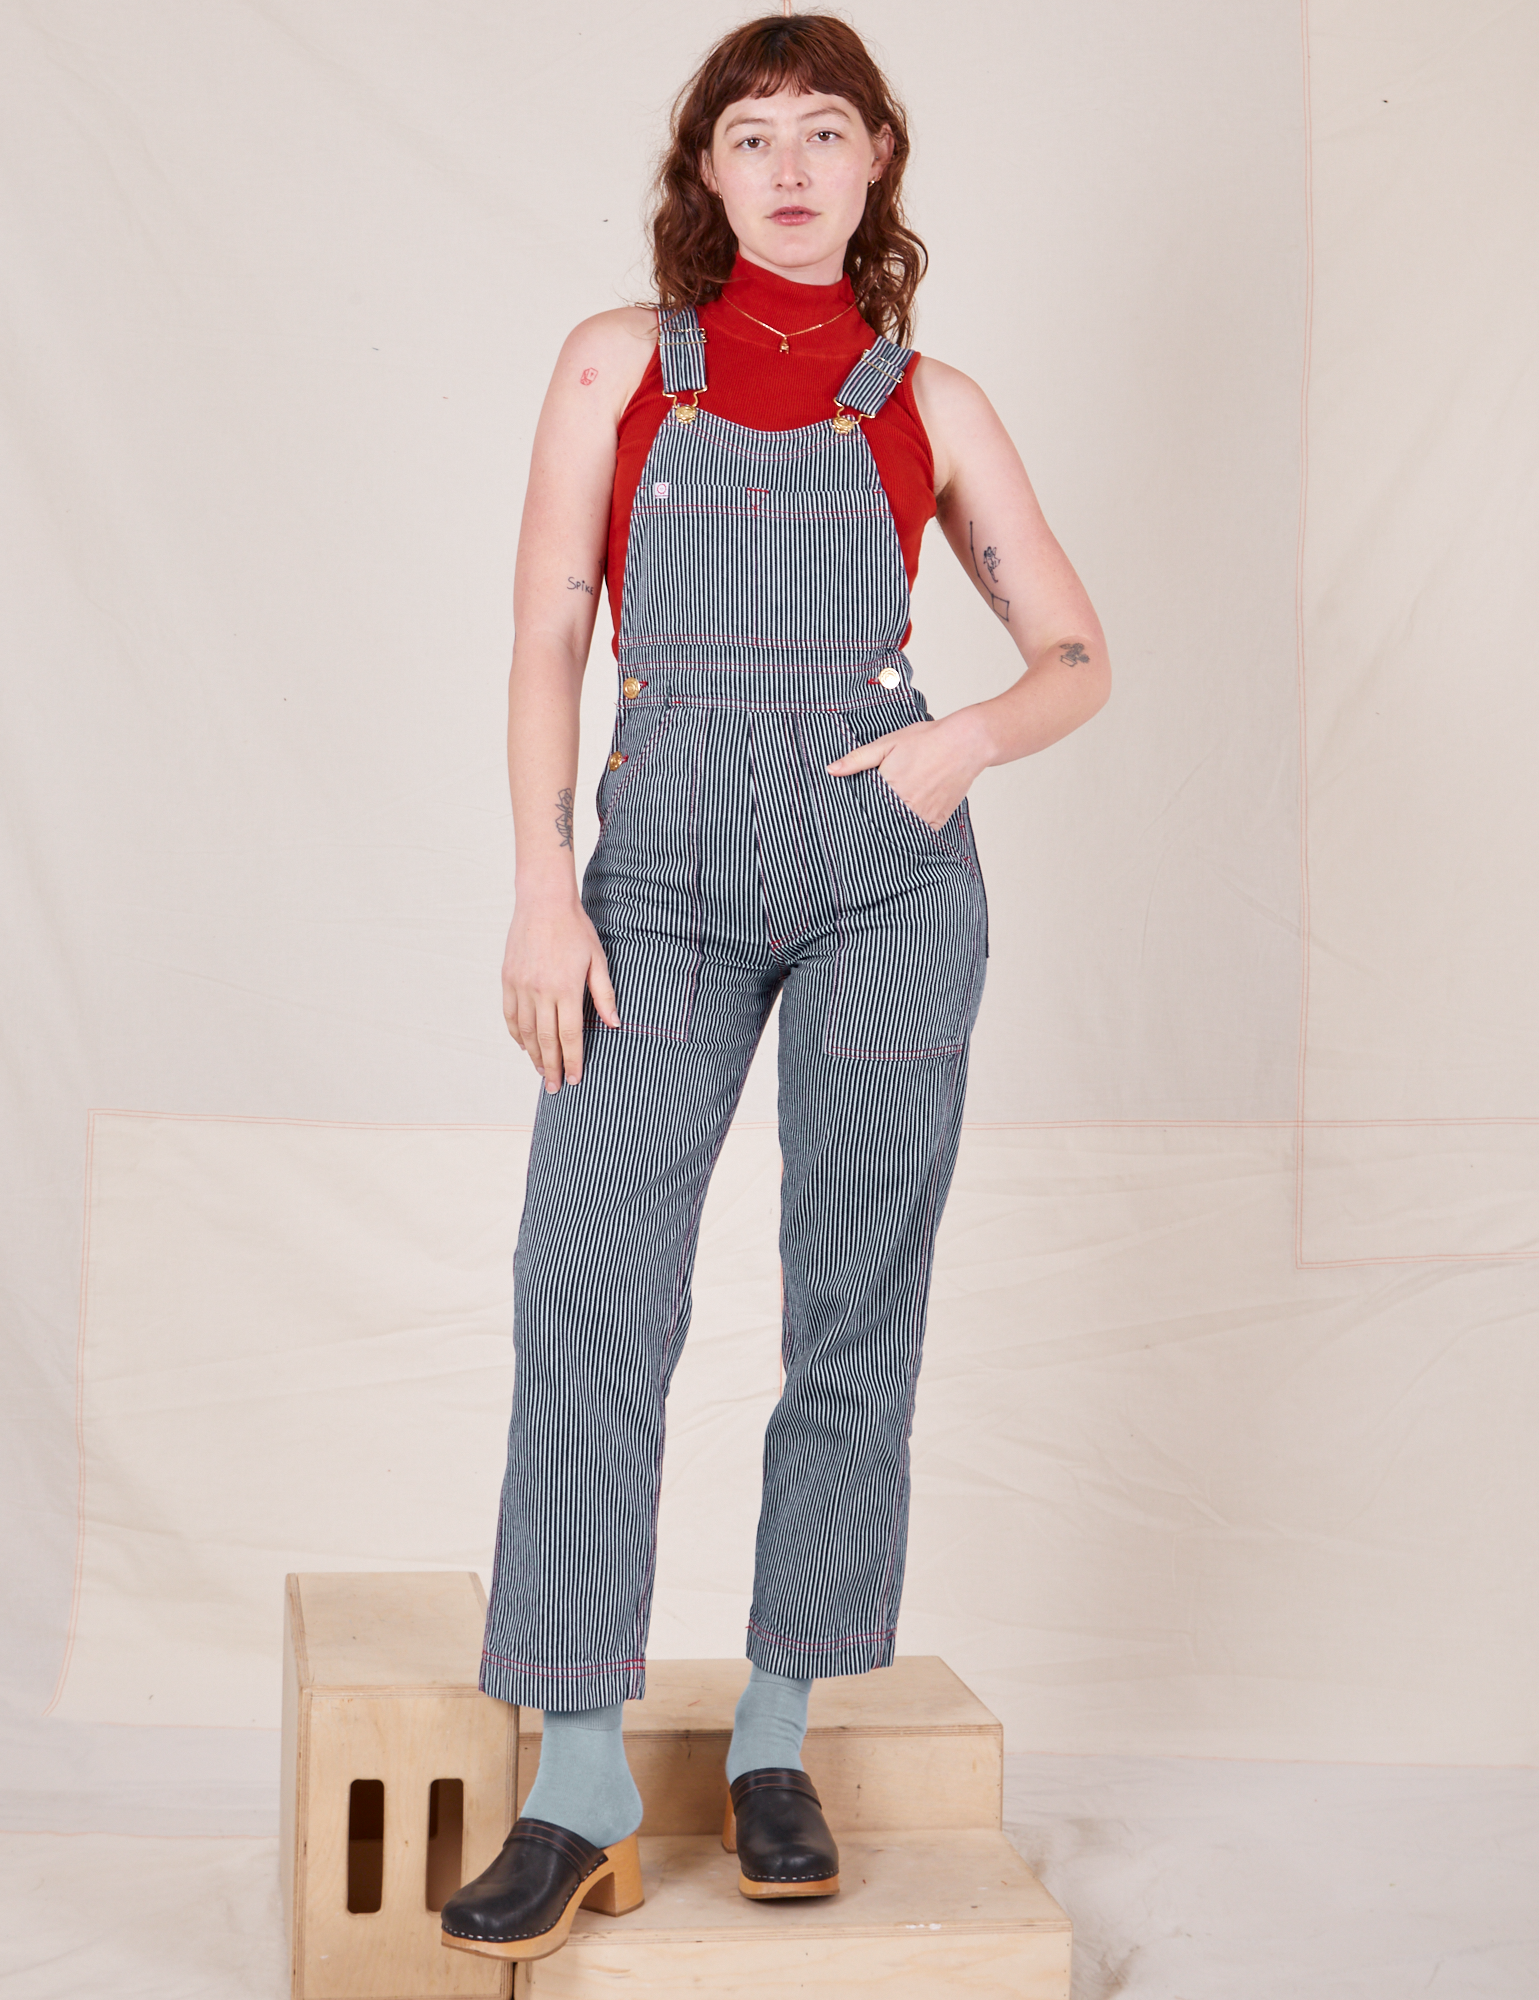 Alex is 5&#39;8&quot; and wearing P Railroad Stripe Denim Original Overalls paired with paprika Sleeveless Turtleneck